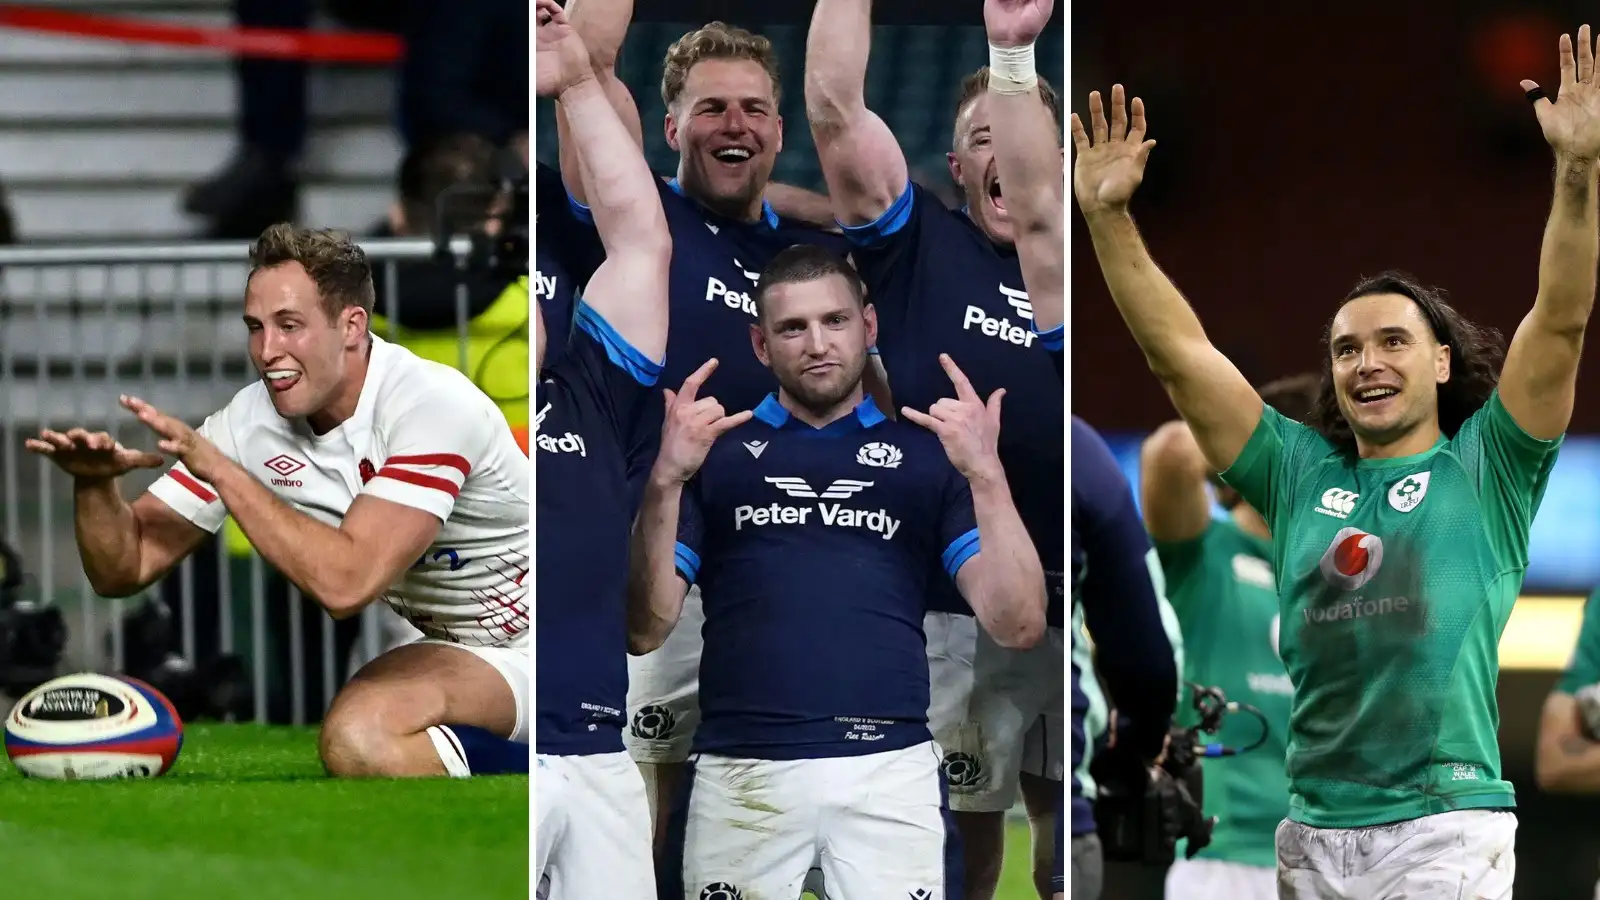 Six Nations Fantasy Tips Following the opening weekend of Rugby's Greatest Championship, Planet Rugby runs through the Fanasty Six Nations tips statistics and highlights the best in all fifteen positions. Six Ireland and Scotland players topped the points tallies in their position, while France, England and Italy all have just one player represented in the XV.